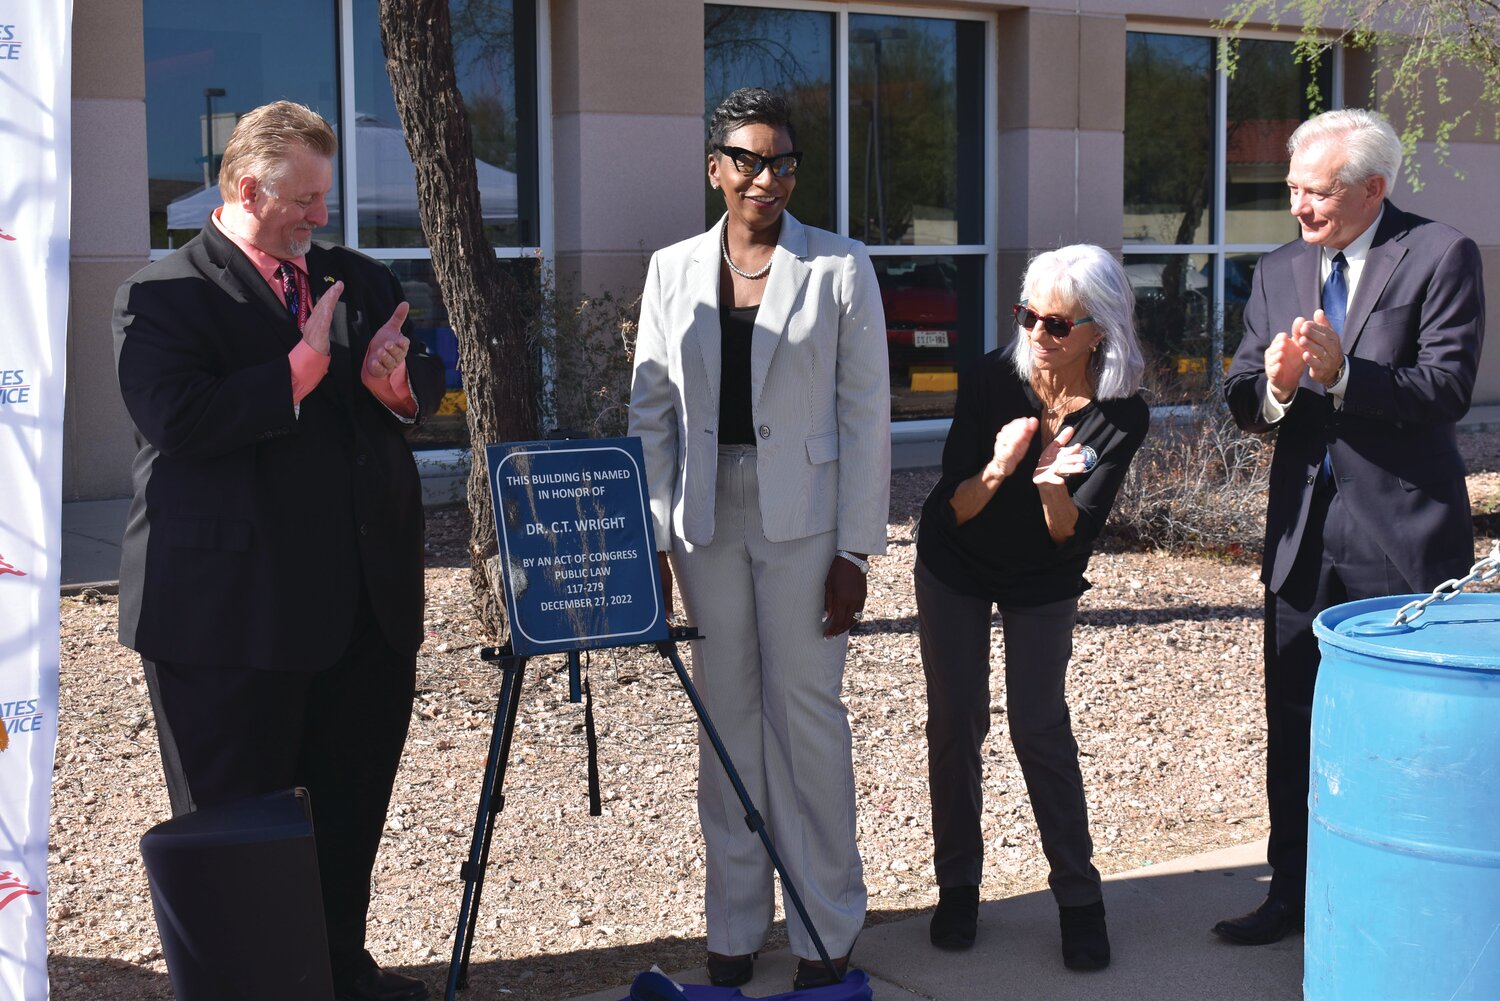 Congressman David Schweikert (AZ – 1), a Fountain Hills resident and friend of the late Dr. C.T. Wright, spearheaded the effort to get the legislation to name the local Post Office in Wright’s honor.